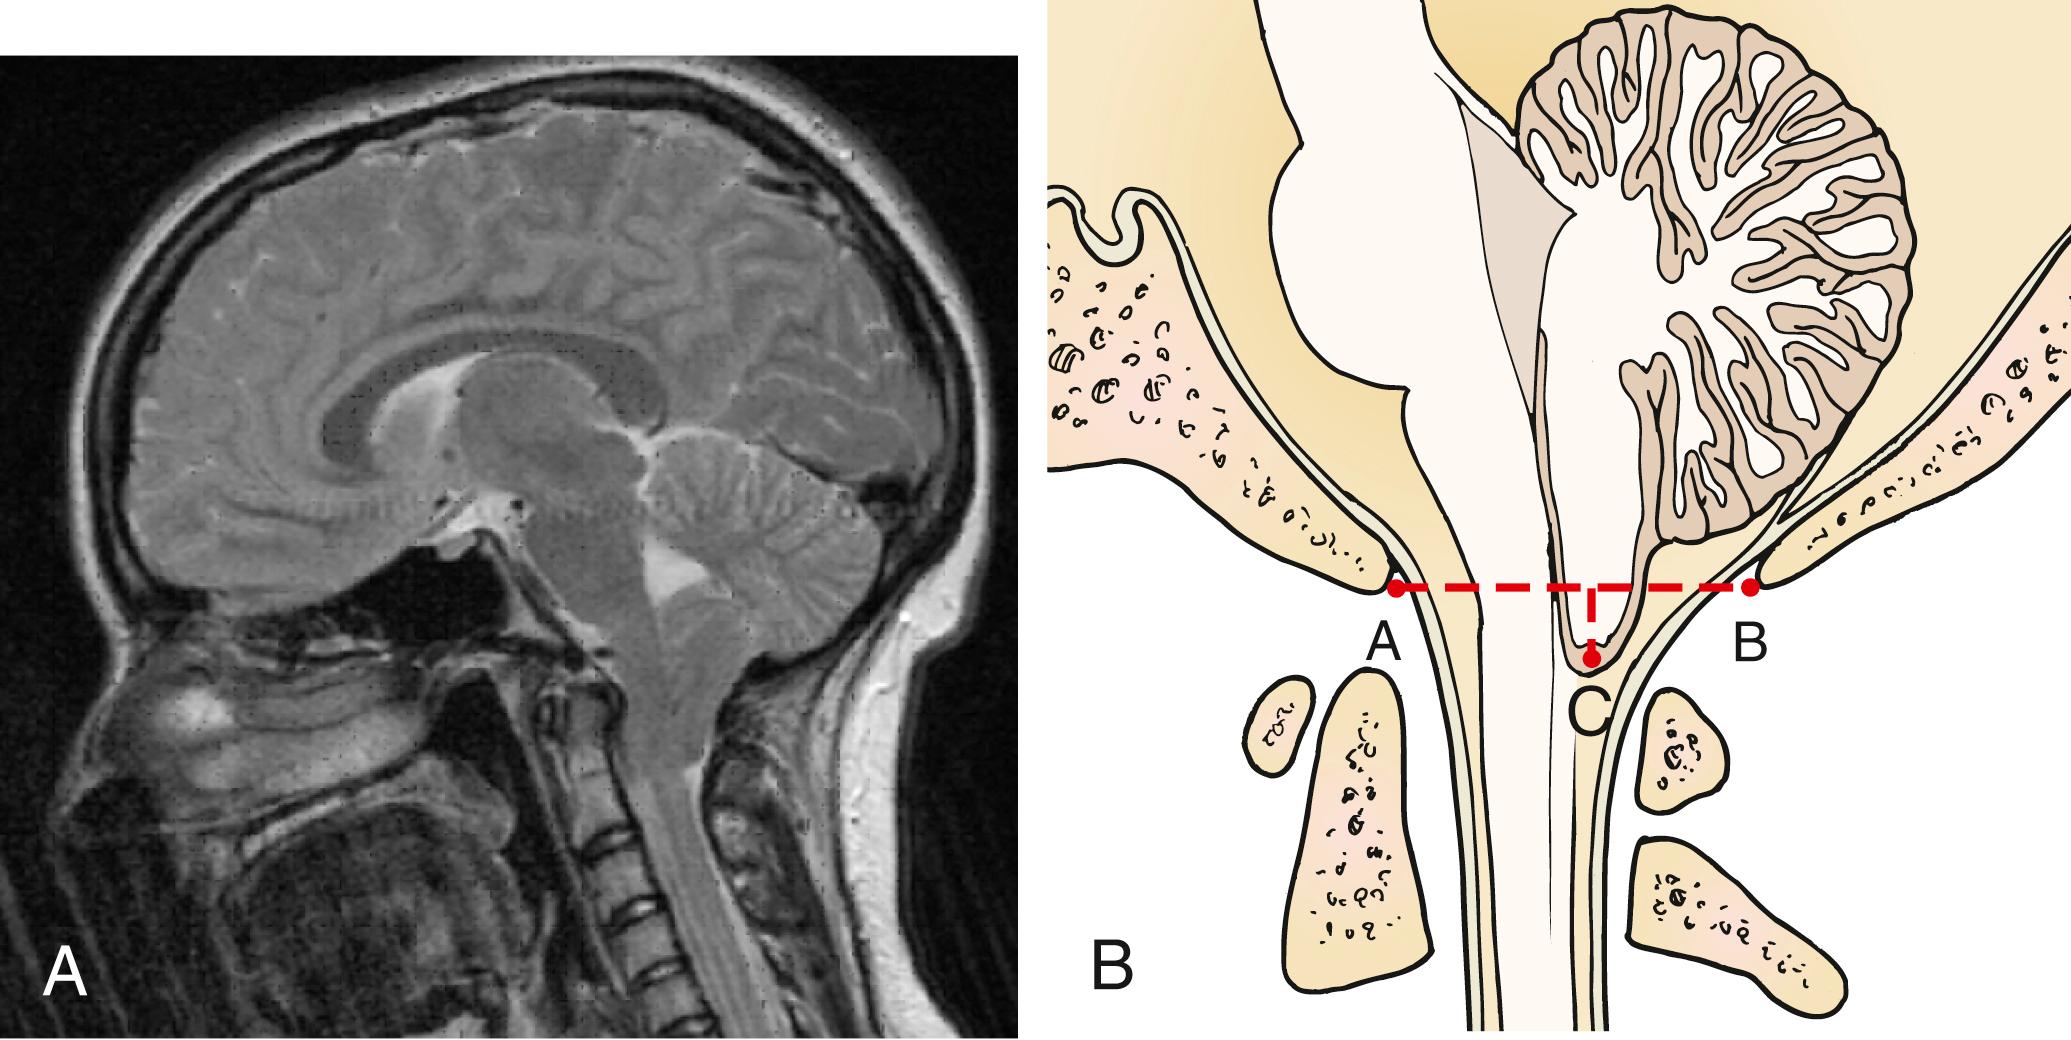 Fig. 28.1, A, Sagittal magnetic resonance imaging demonstrating typical Chiari I findings including 18-mm tonsillar descent. B, Schematic demonstrating the appropriate technique to measure the degree of tonsillar descent. The line from A to B represents the McRae line; a perpendicular line is then measured from this point to the inferior aspect of the cerebellar tonsil ( C ).